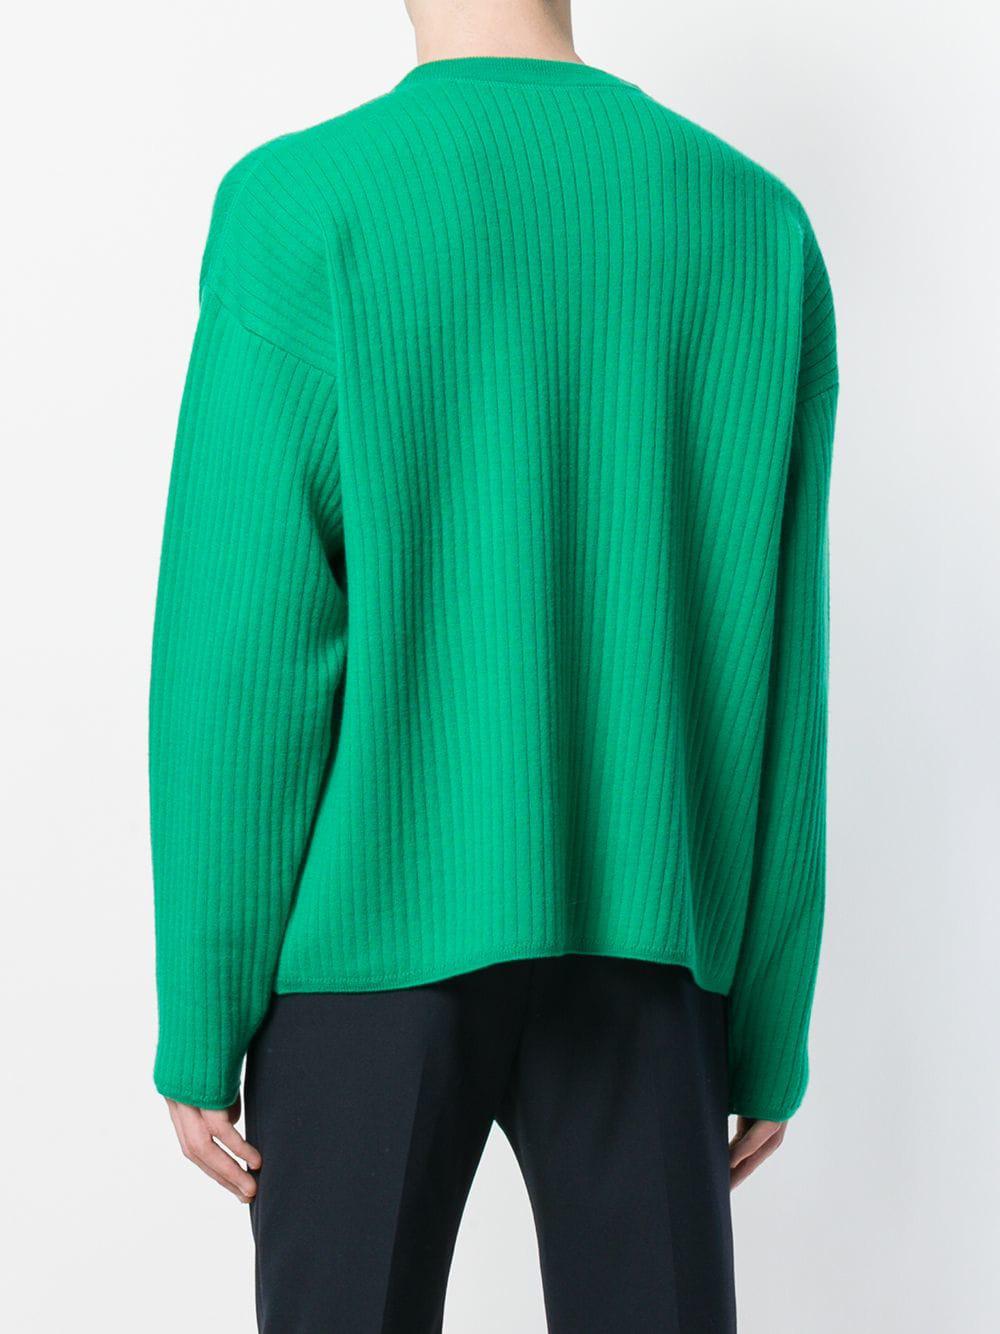 AMI Crew Neck Wool Oversize Sweater in Green for Men - Lyst